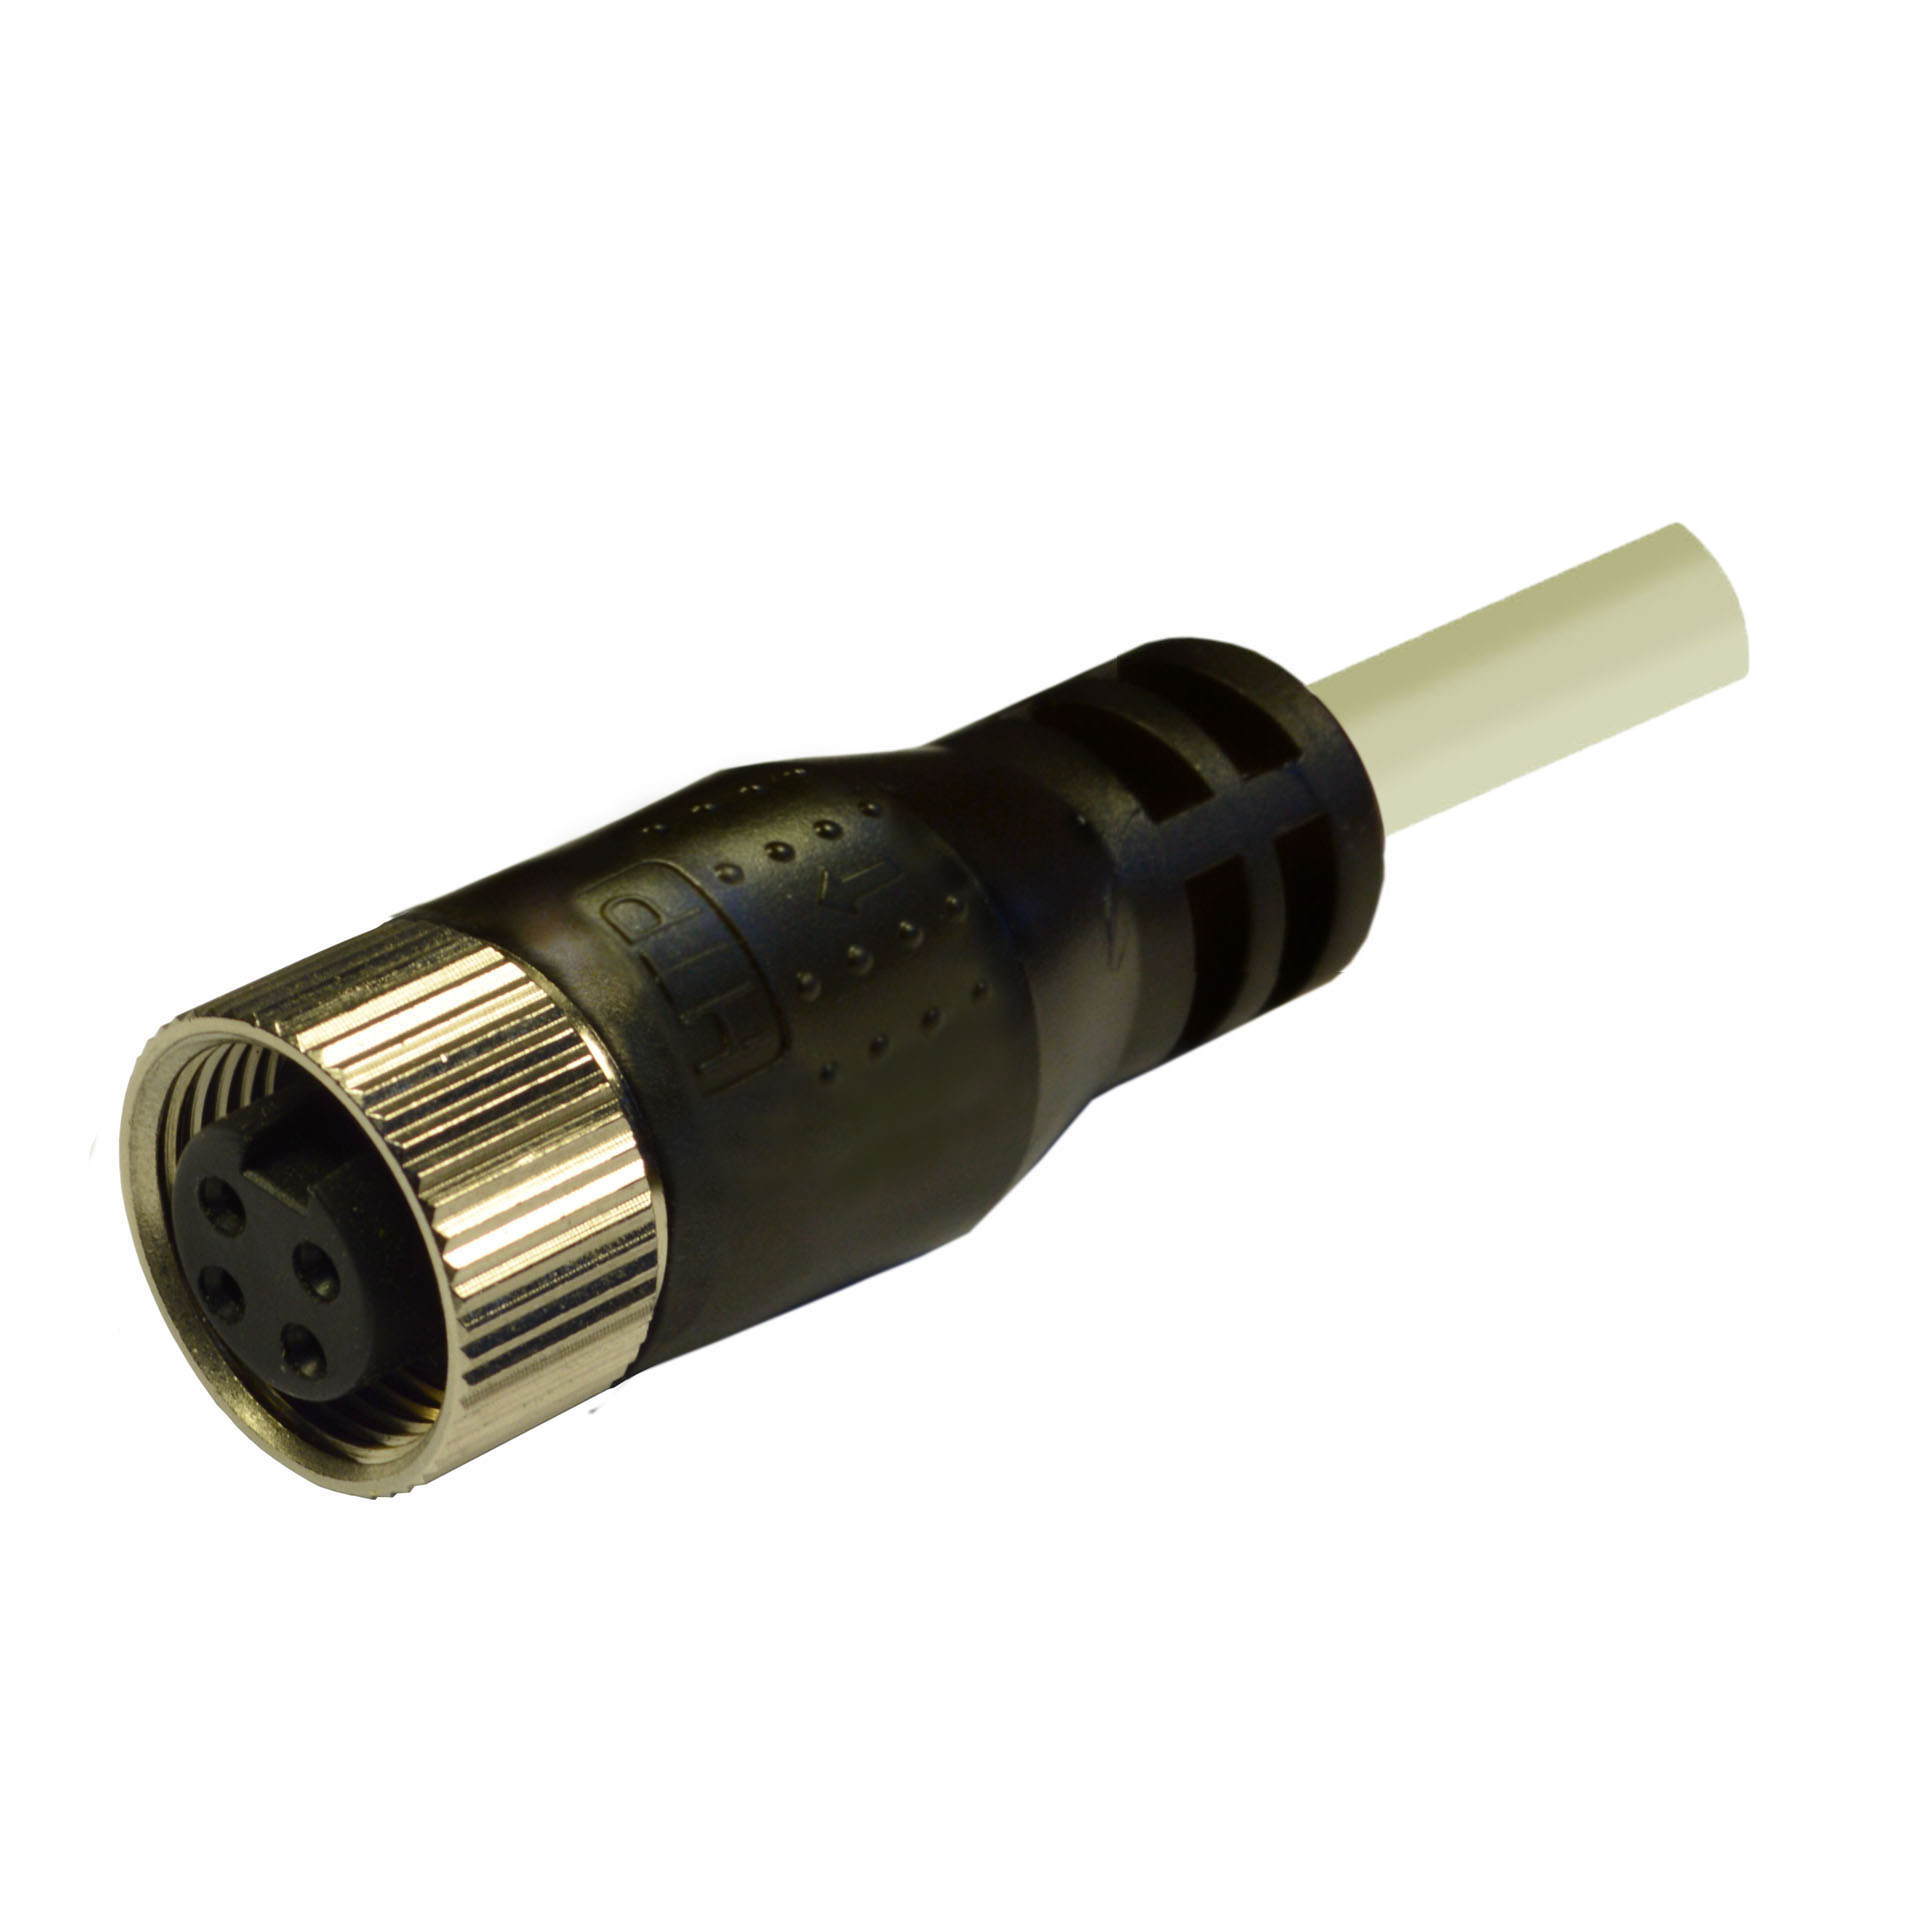 7/8 connector, female, 180°, with 2.5m of cable 4x1,5 shielded, colour grey